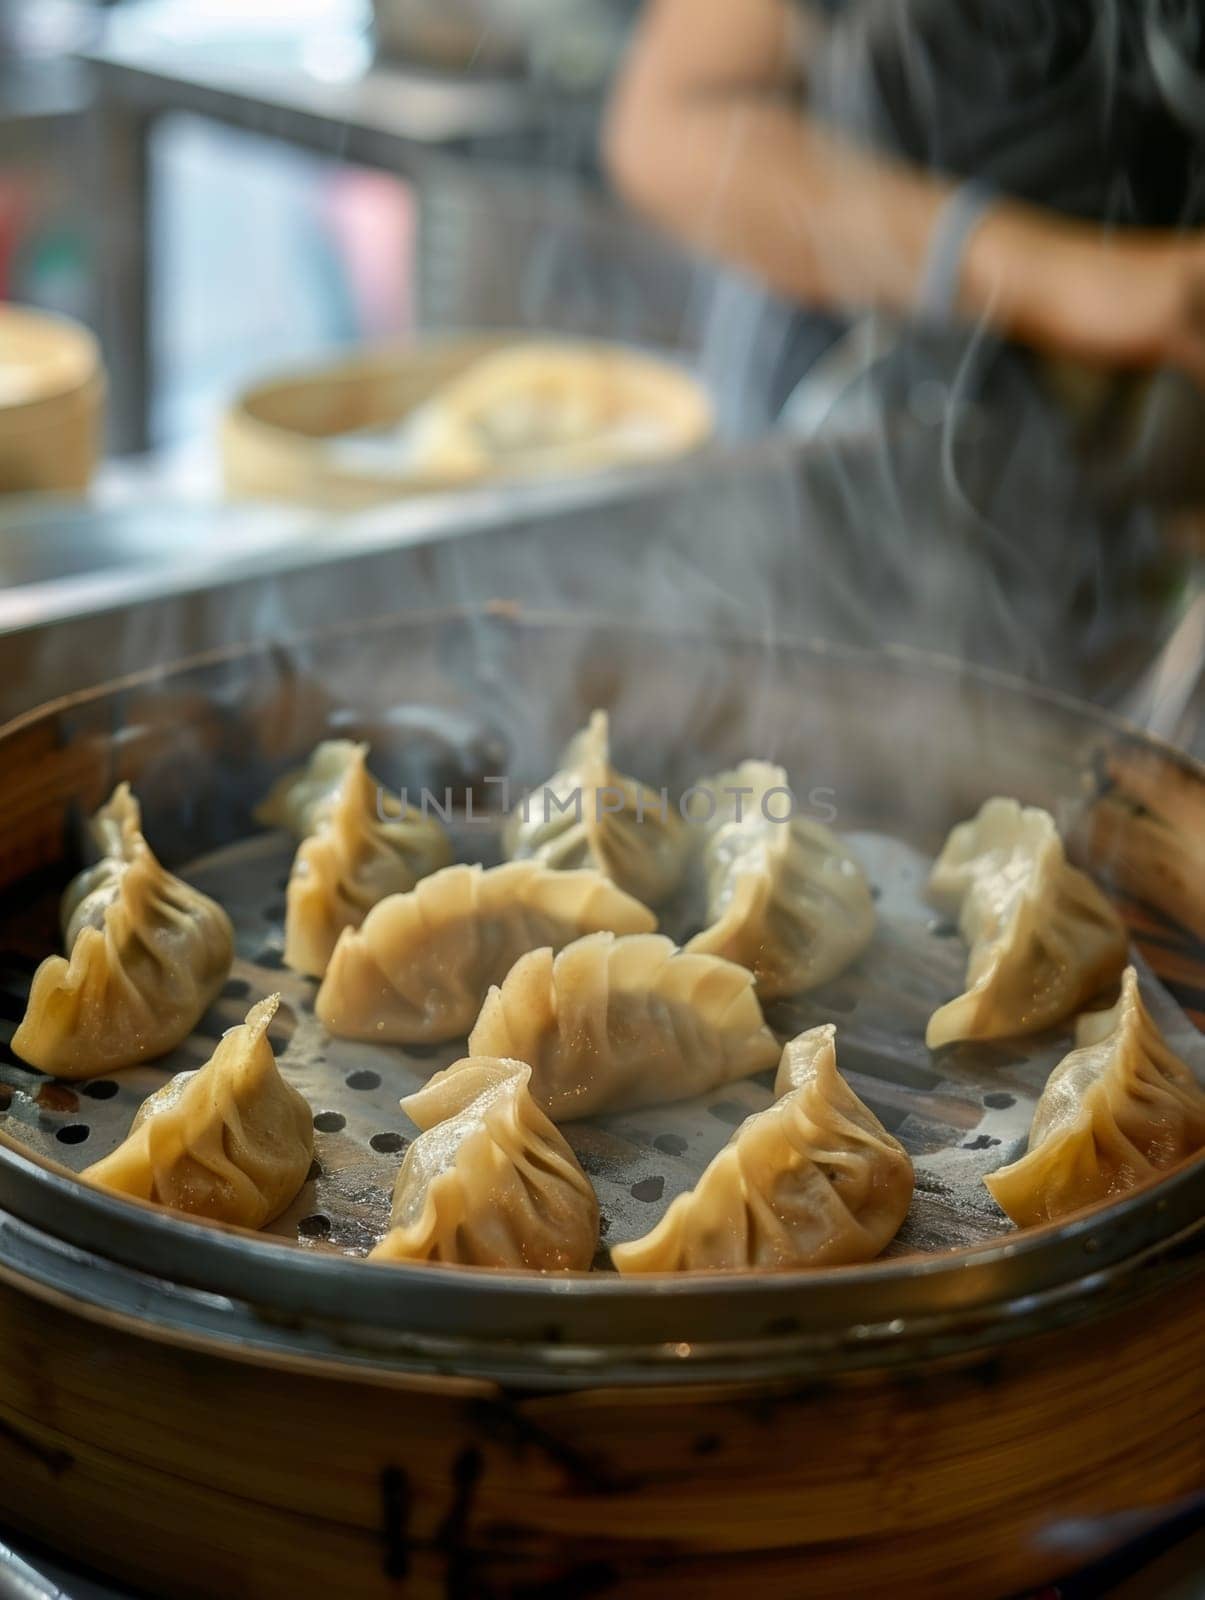 Mongolian buuz, steamed dumplings filled with savory meat, presented on a traditional bamboo steamer tray. This handcrafted dish reflects the unique culinary heritage of Central Asia. by sfinks